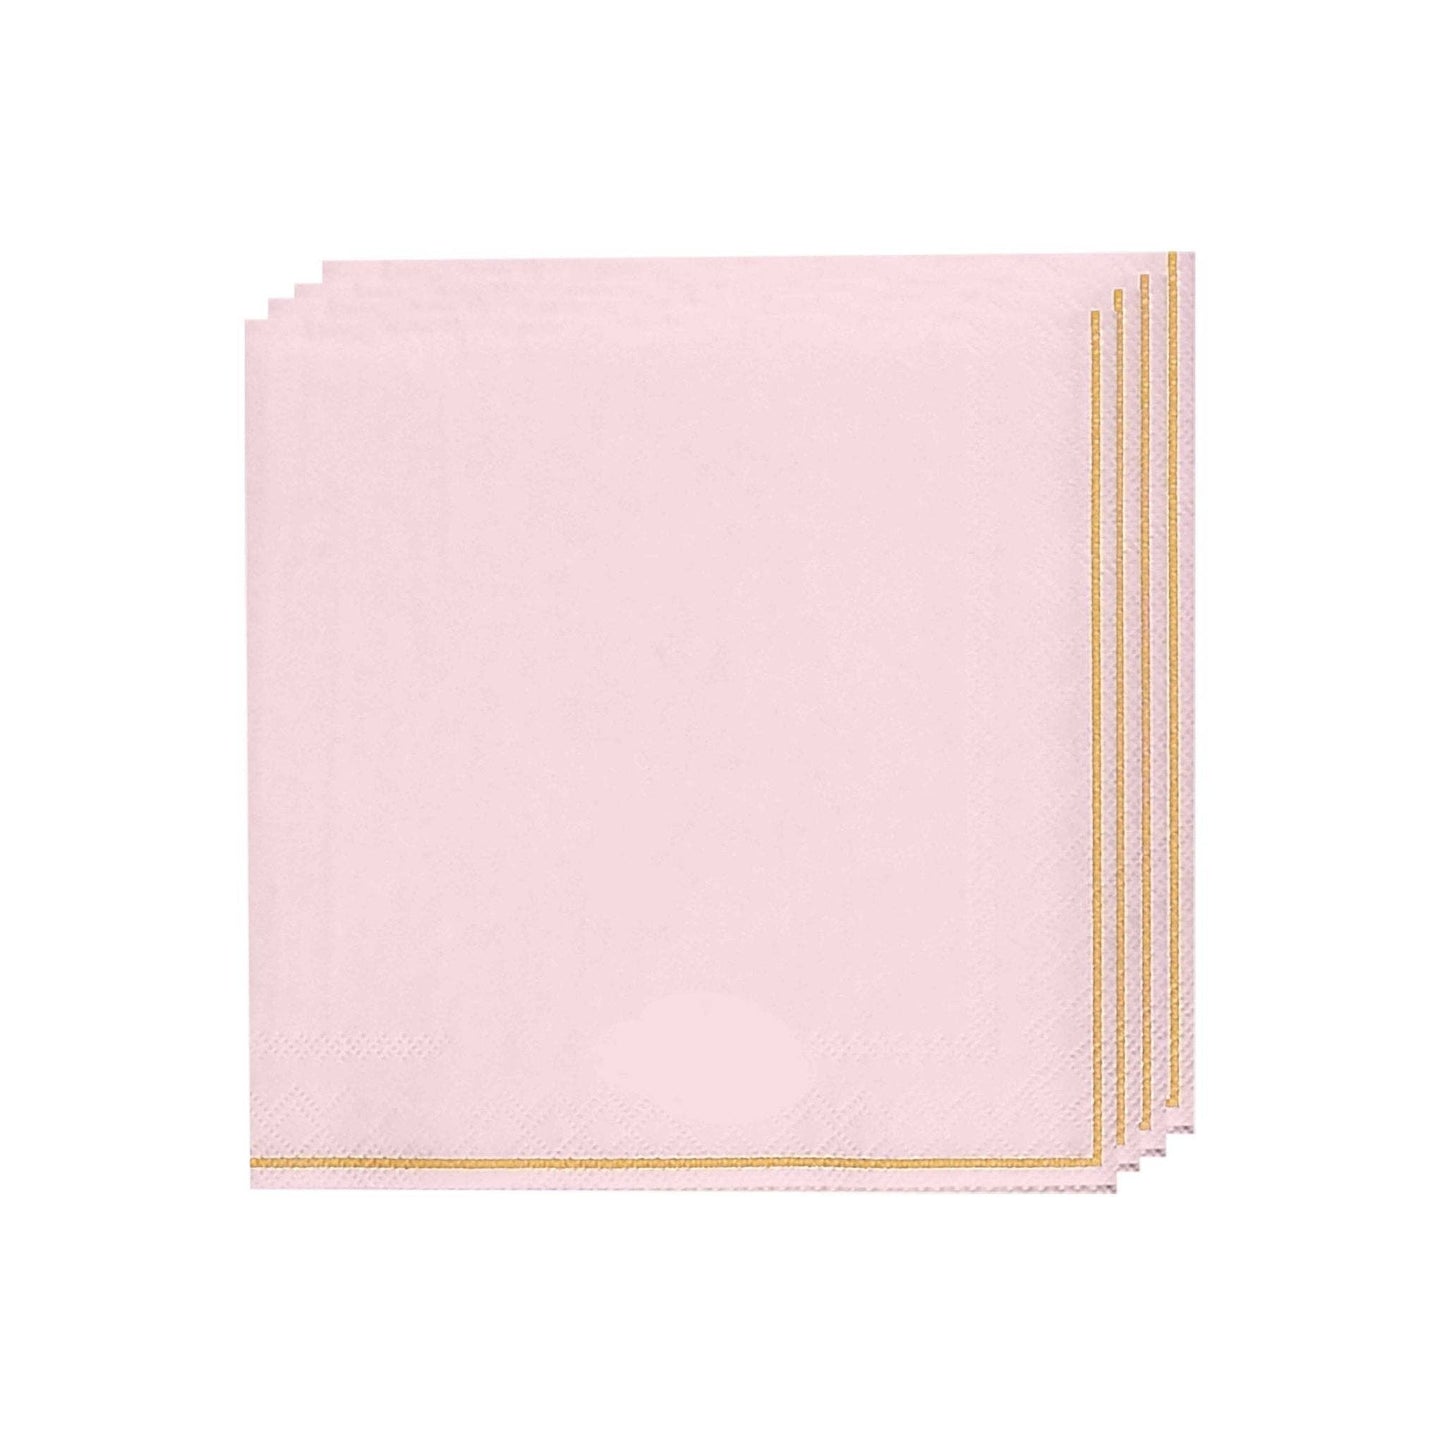 Blush with Gold Stripe Paper Napkins - 3 available sizes